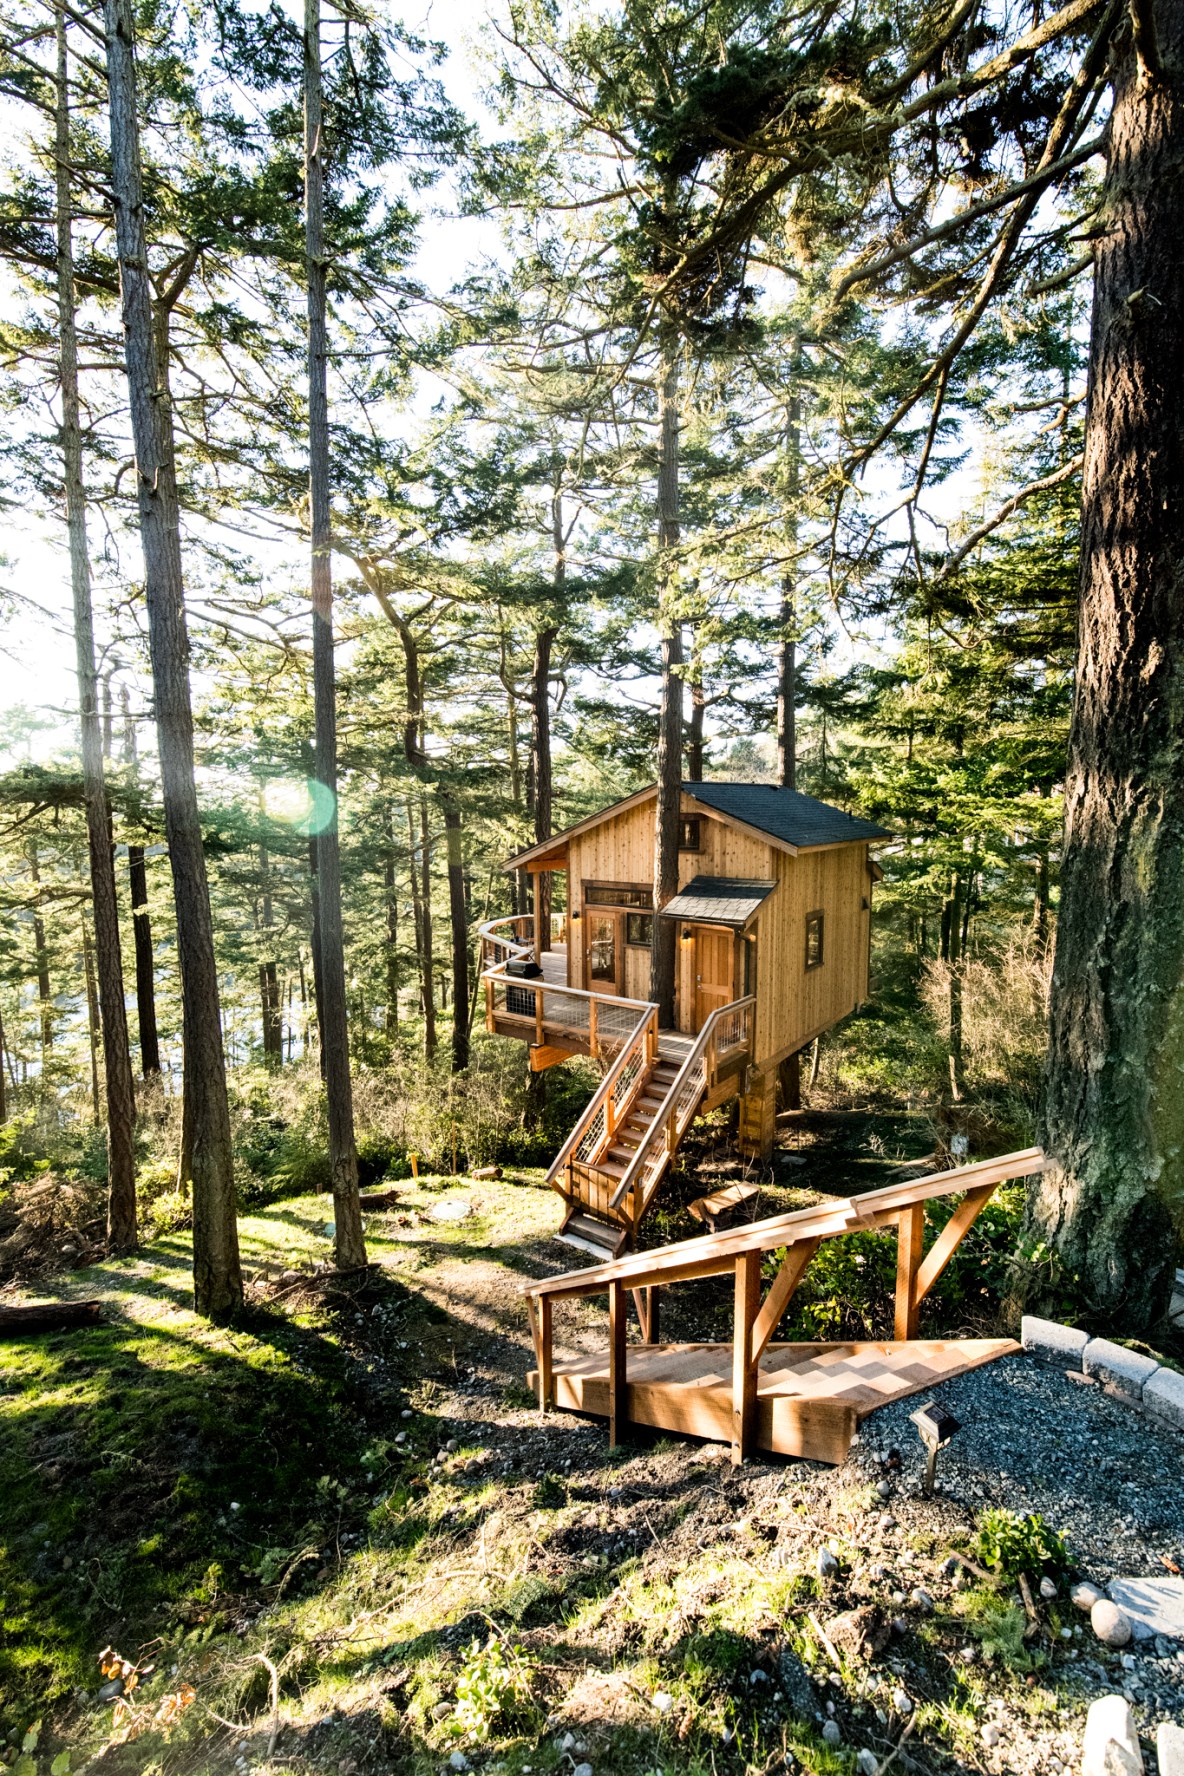 One level tree-house cabin, with an angled staircase surrounded by trees in a forested location